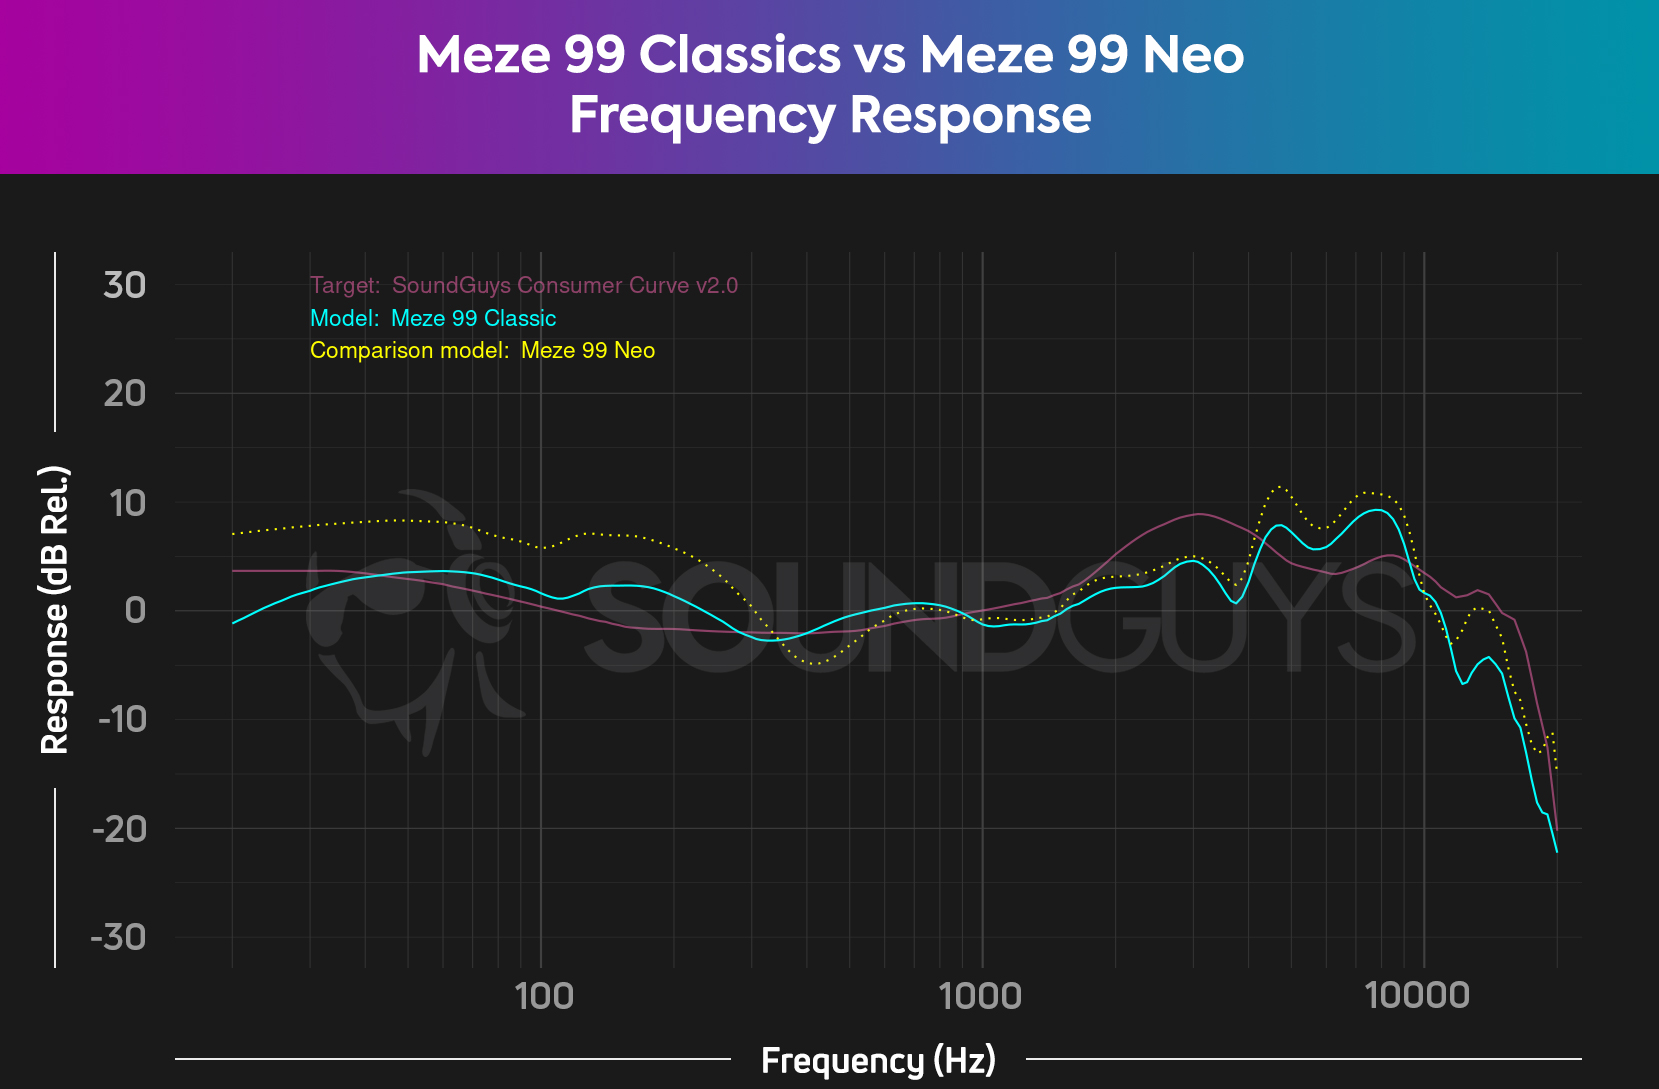 A chart compares the Meze 99 Classics frequency response to the Meze 99 Neo, showing the Neo has a bassier sound.